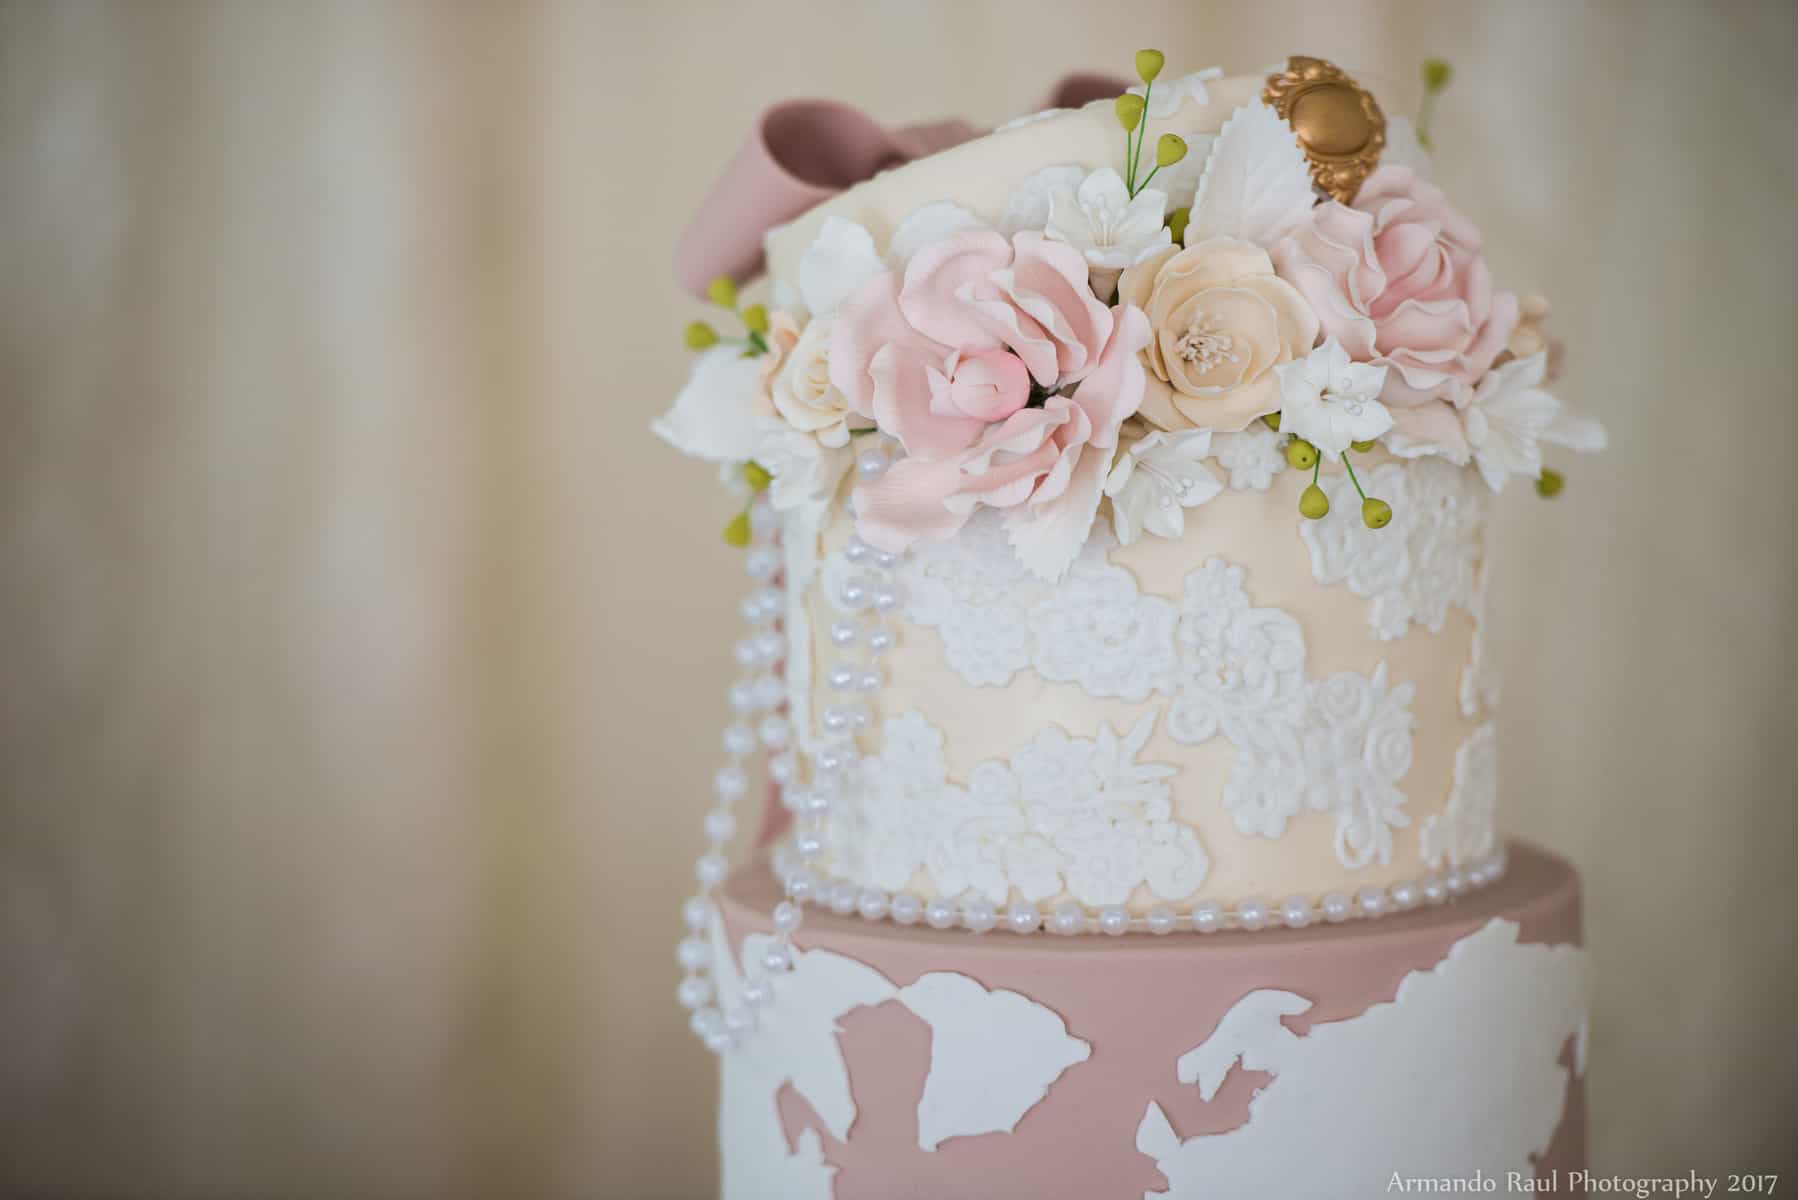 Girl Baby Shower Cake with Vintage Luggage, Lace, Pink, Flowers, Pearls, Bows & a World Map | Vintage Travel Theme Baby Shower | Baby Girl | You Are My Greatest Adventure | Lace, World Map, Flowers, Cameras, Vintage Decor | Cake, Sweets, Desserts, Lounge Seating Area, World Cuisine, Food Stations, Seating Arrangement | Home Baby Shower | Blush Pink, Beige, Gold, Champagne, White